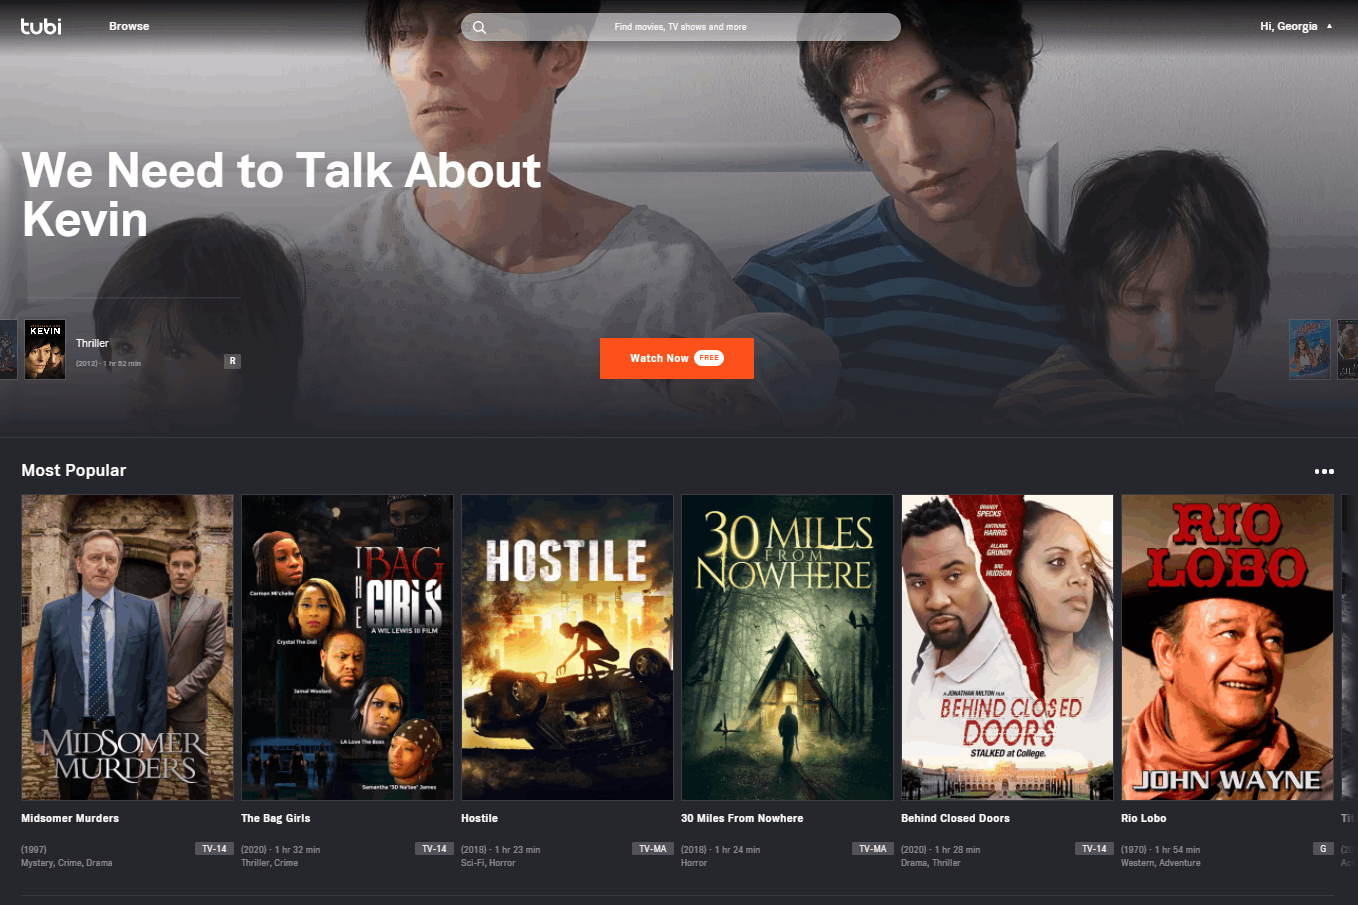 Tubi - The Amazing Free App that Thalia Reyes Recommends with Thousands of Movies and TV Shows